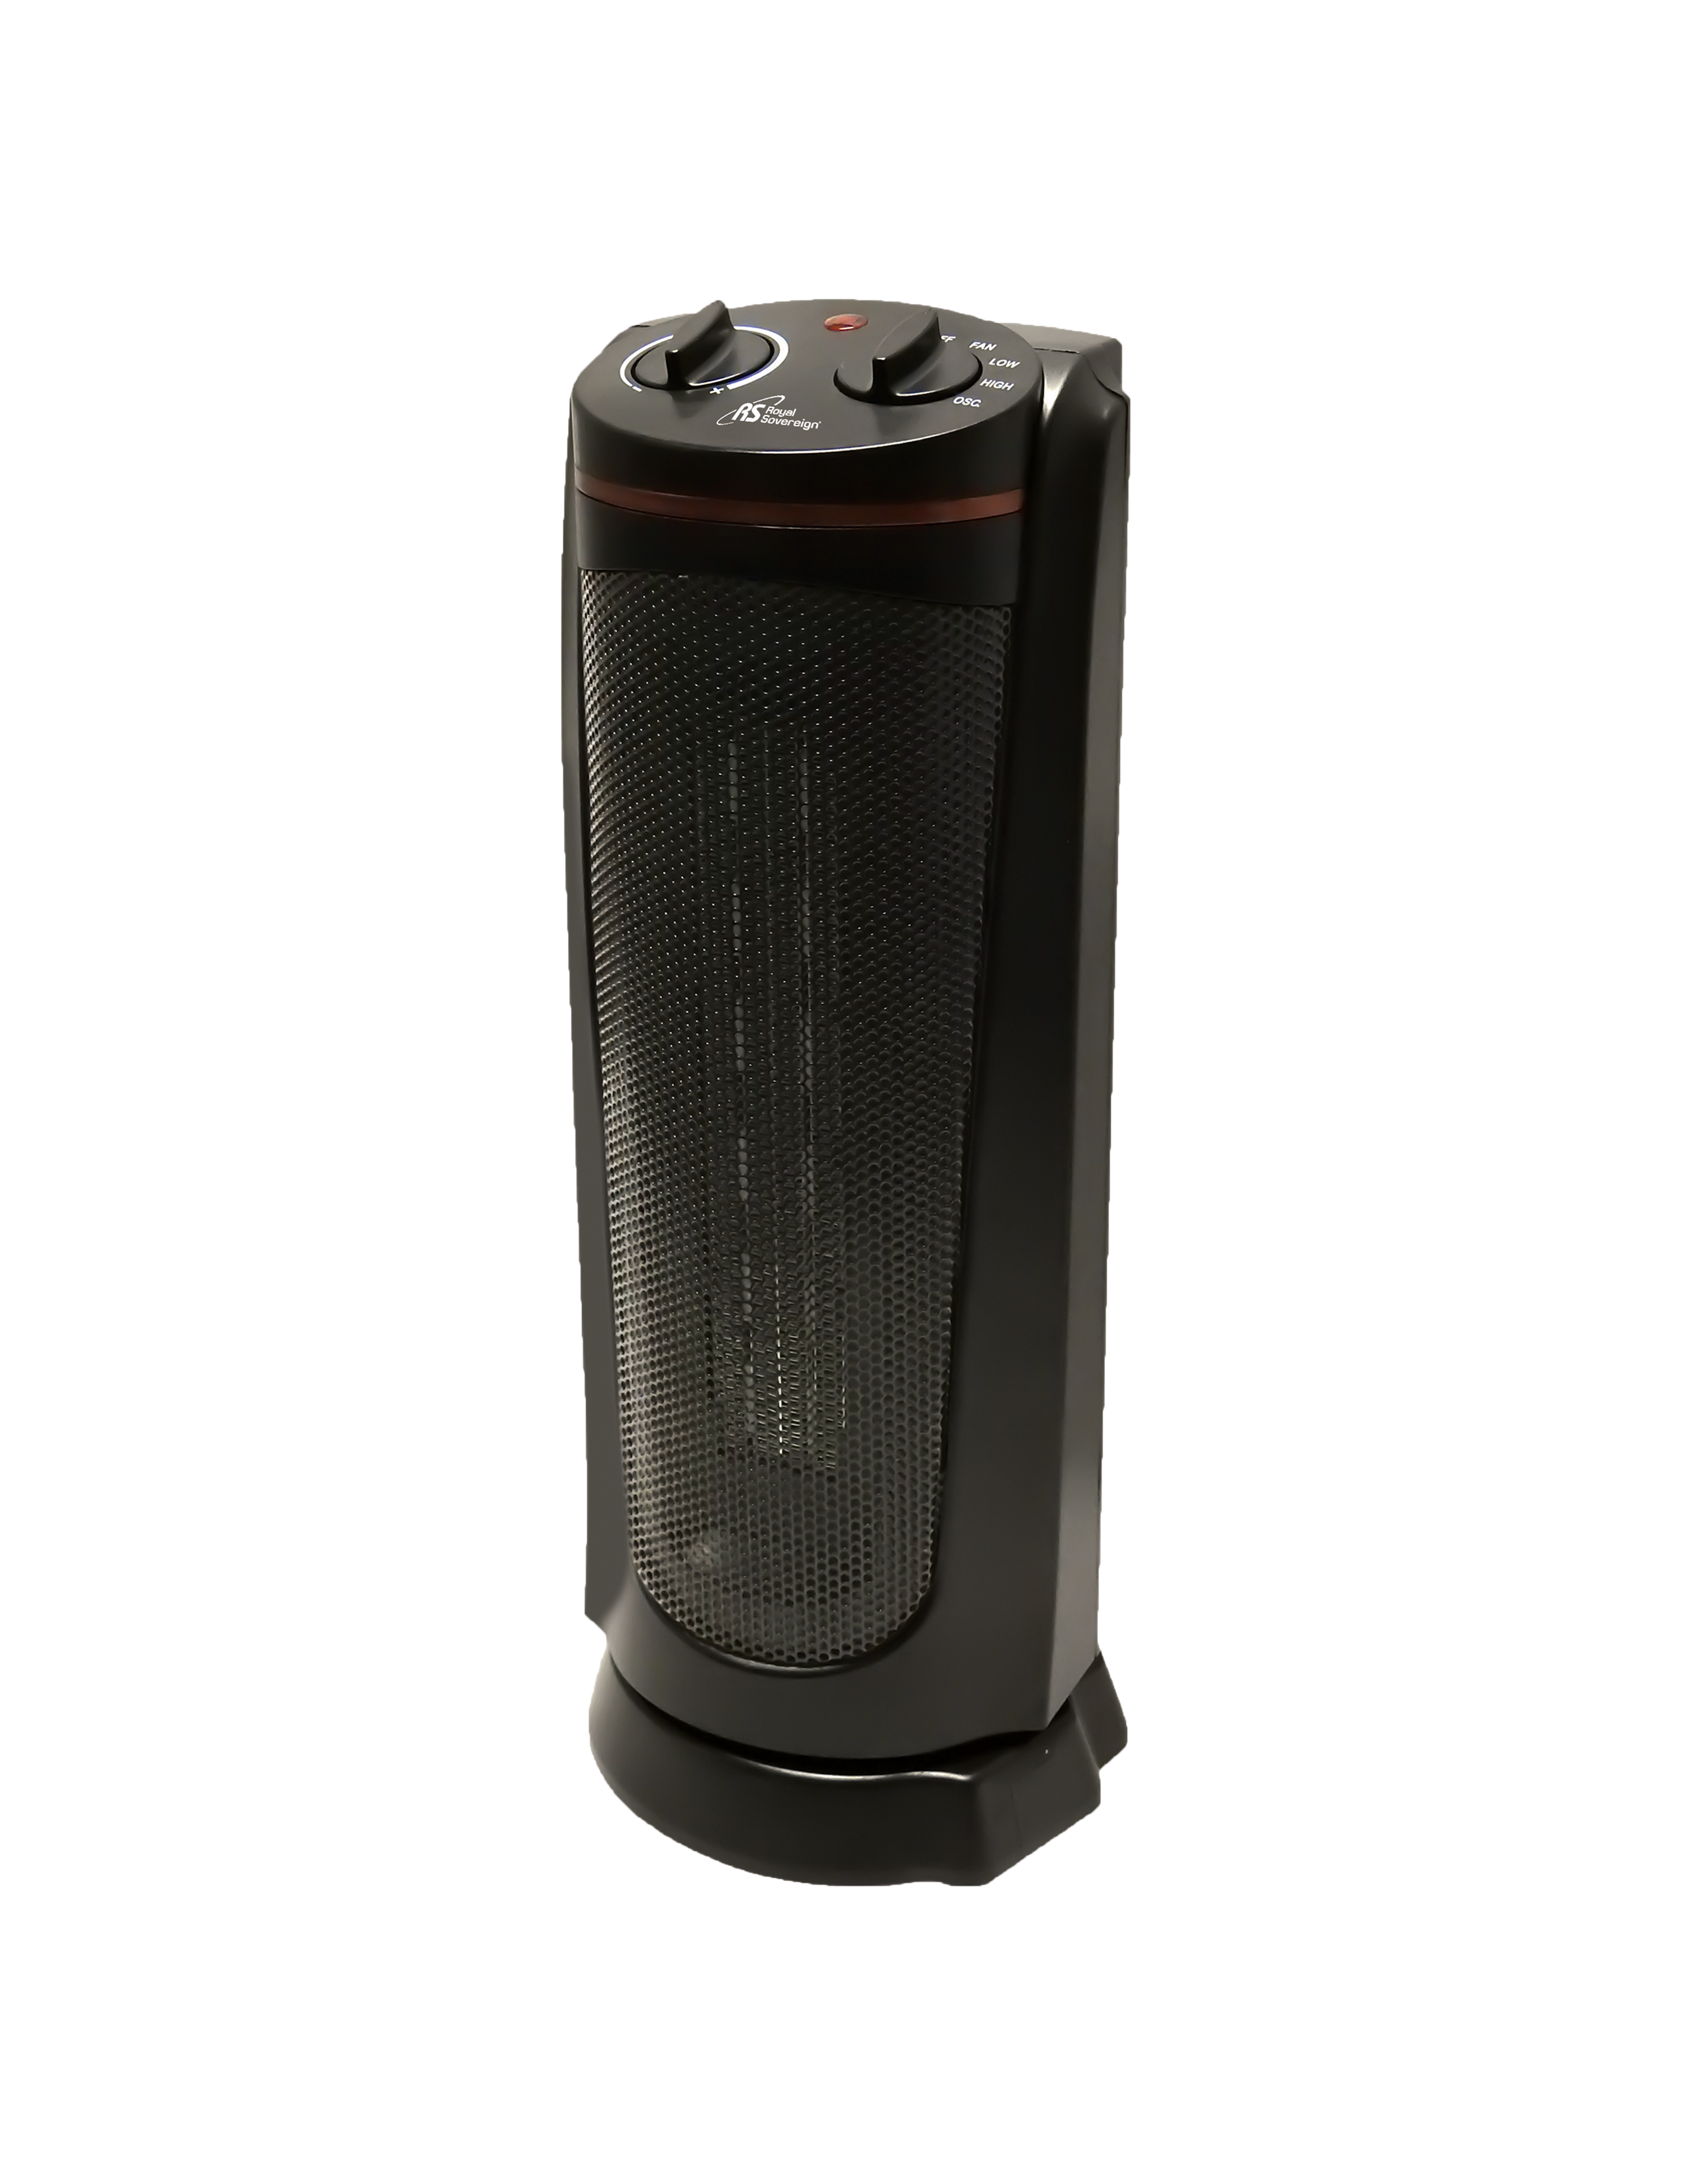 HCE-190/ 19” Compact Ceramic Tower Heater